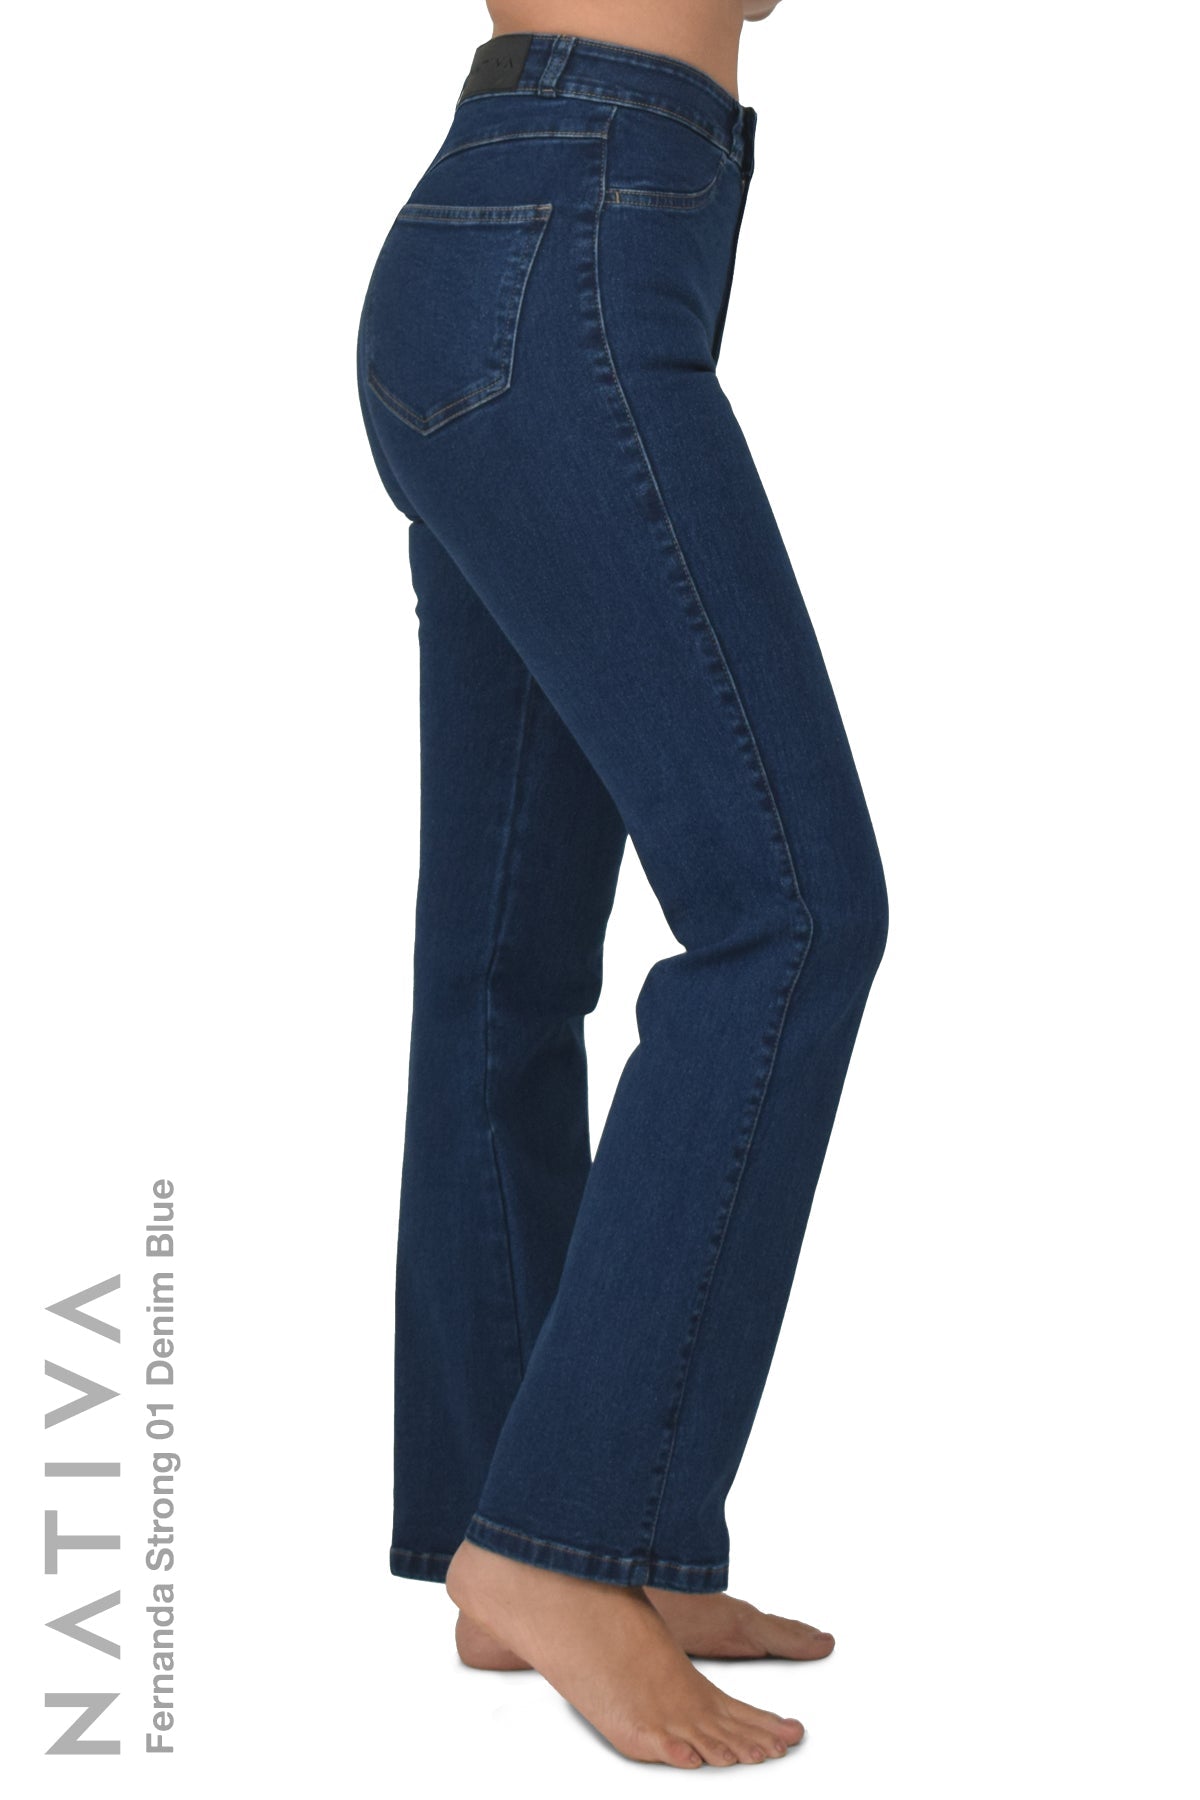 Mede jeans colombianos MD014 – Atrevete Jeans